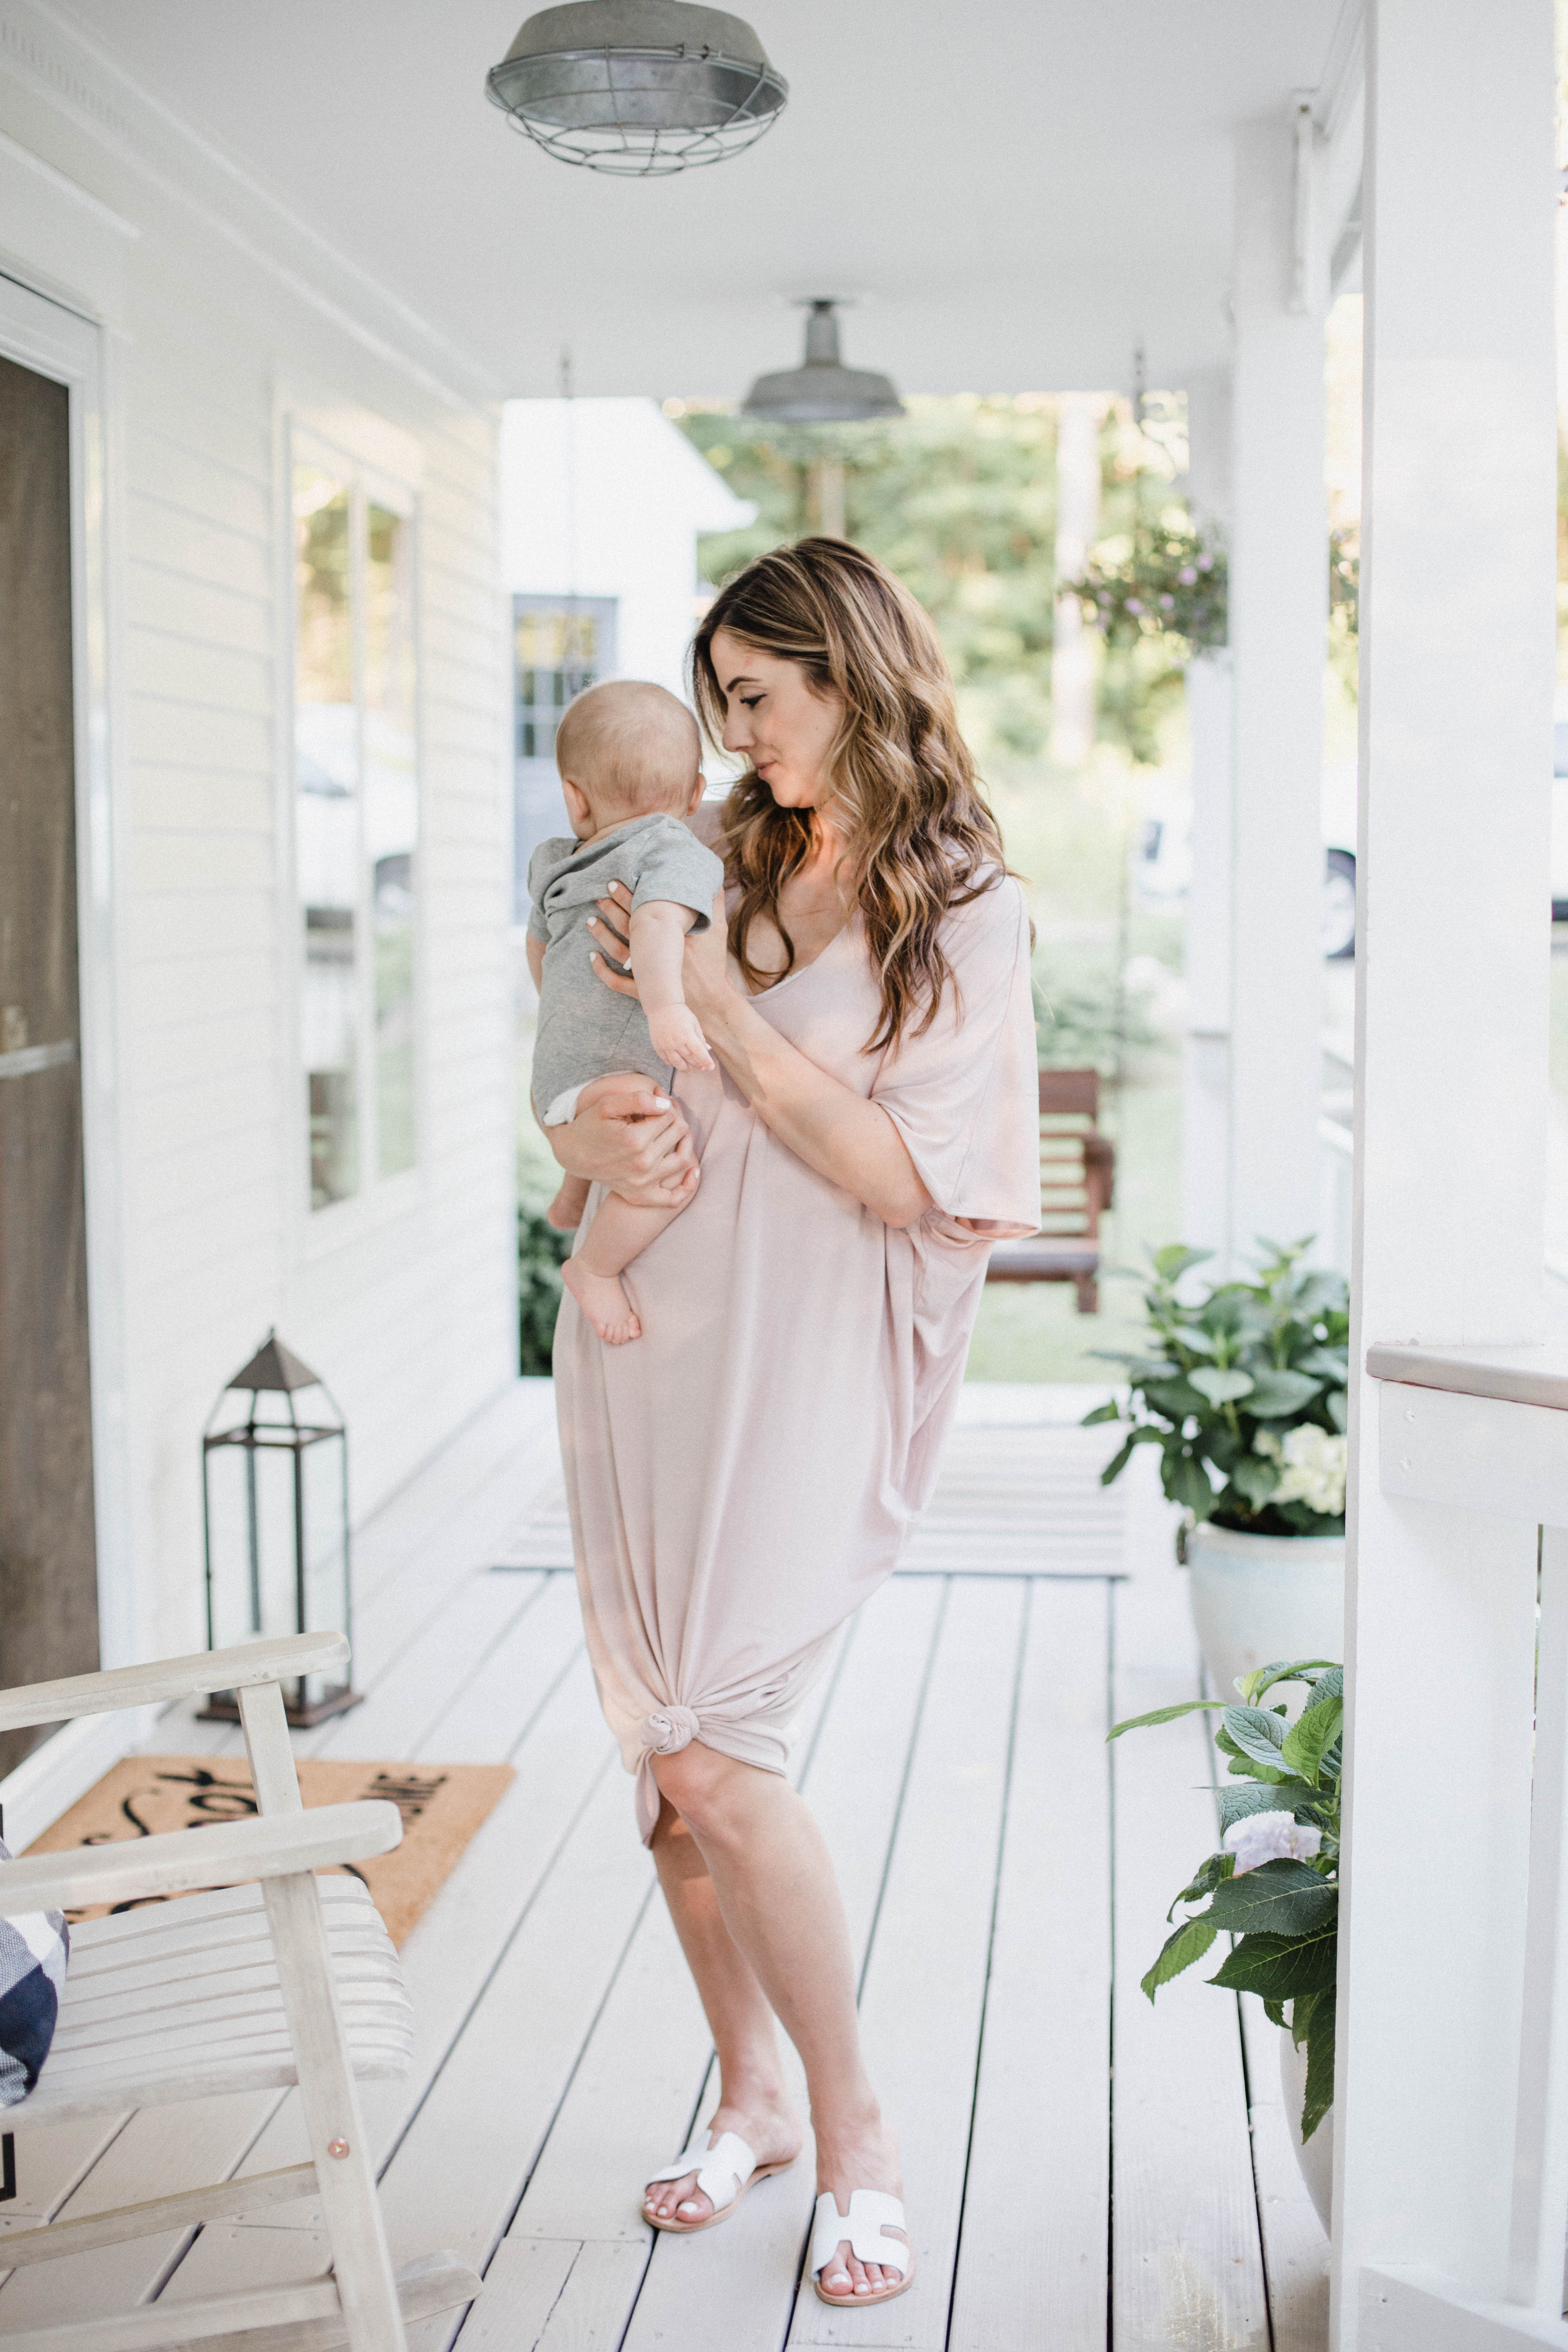 Life and style blogger Lauren McBride shares some tips on how to get your groove back after having a baby.